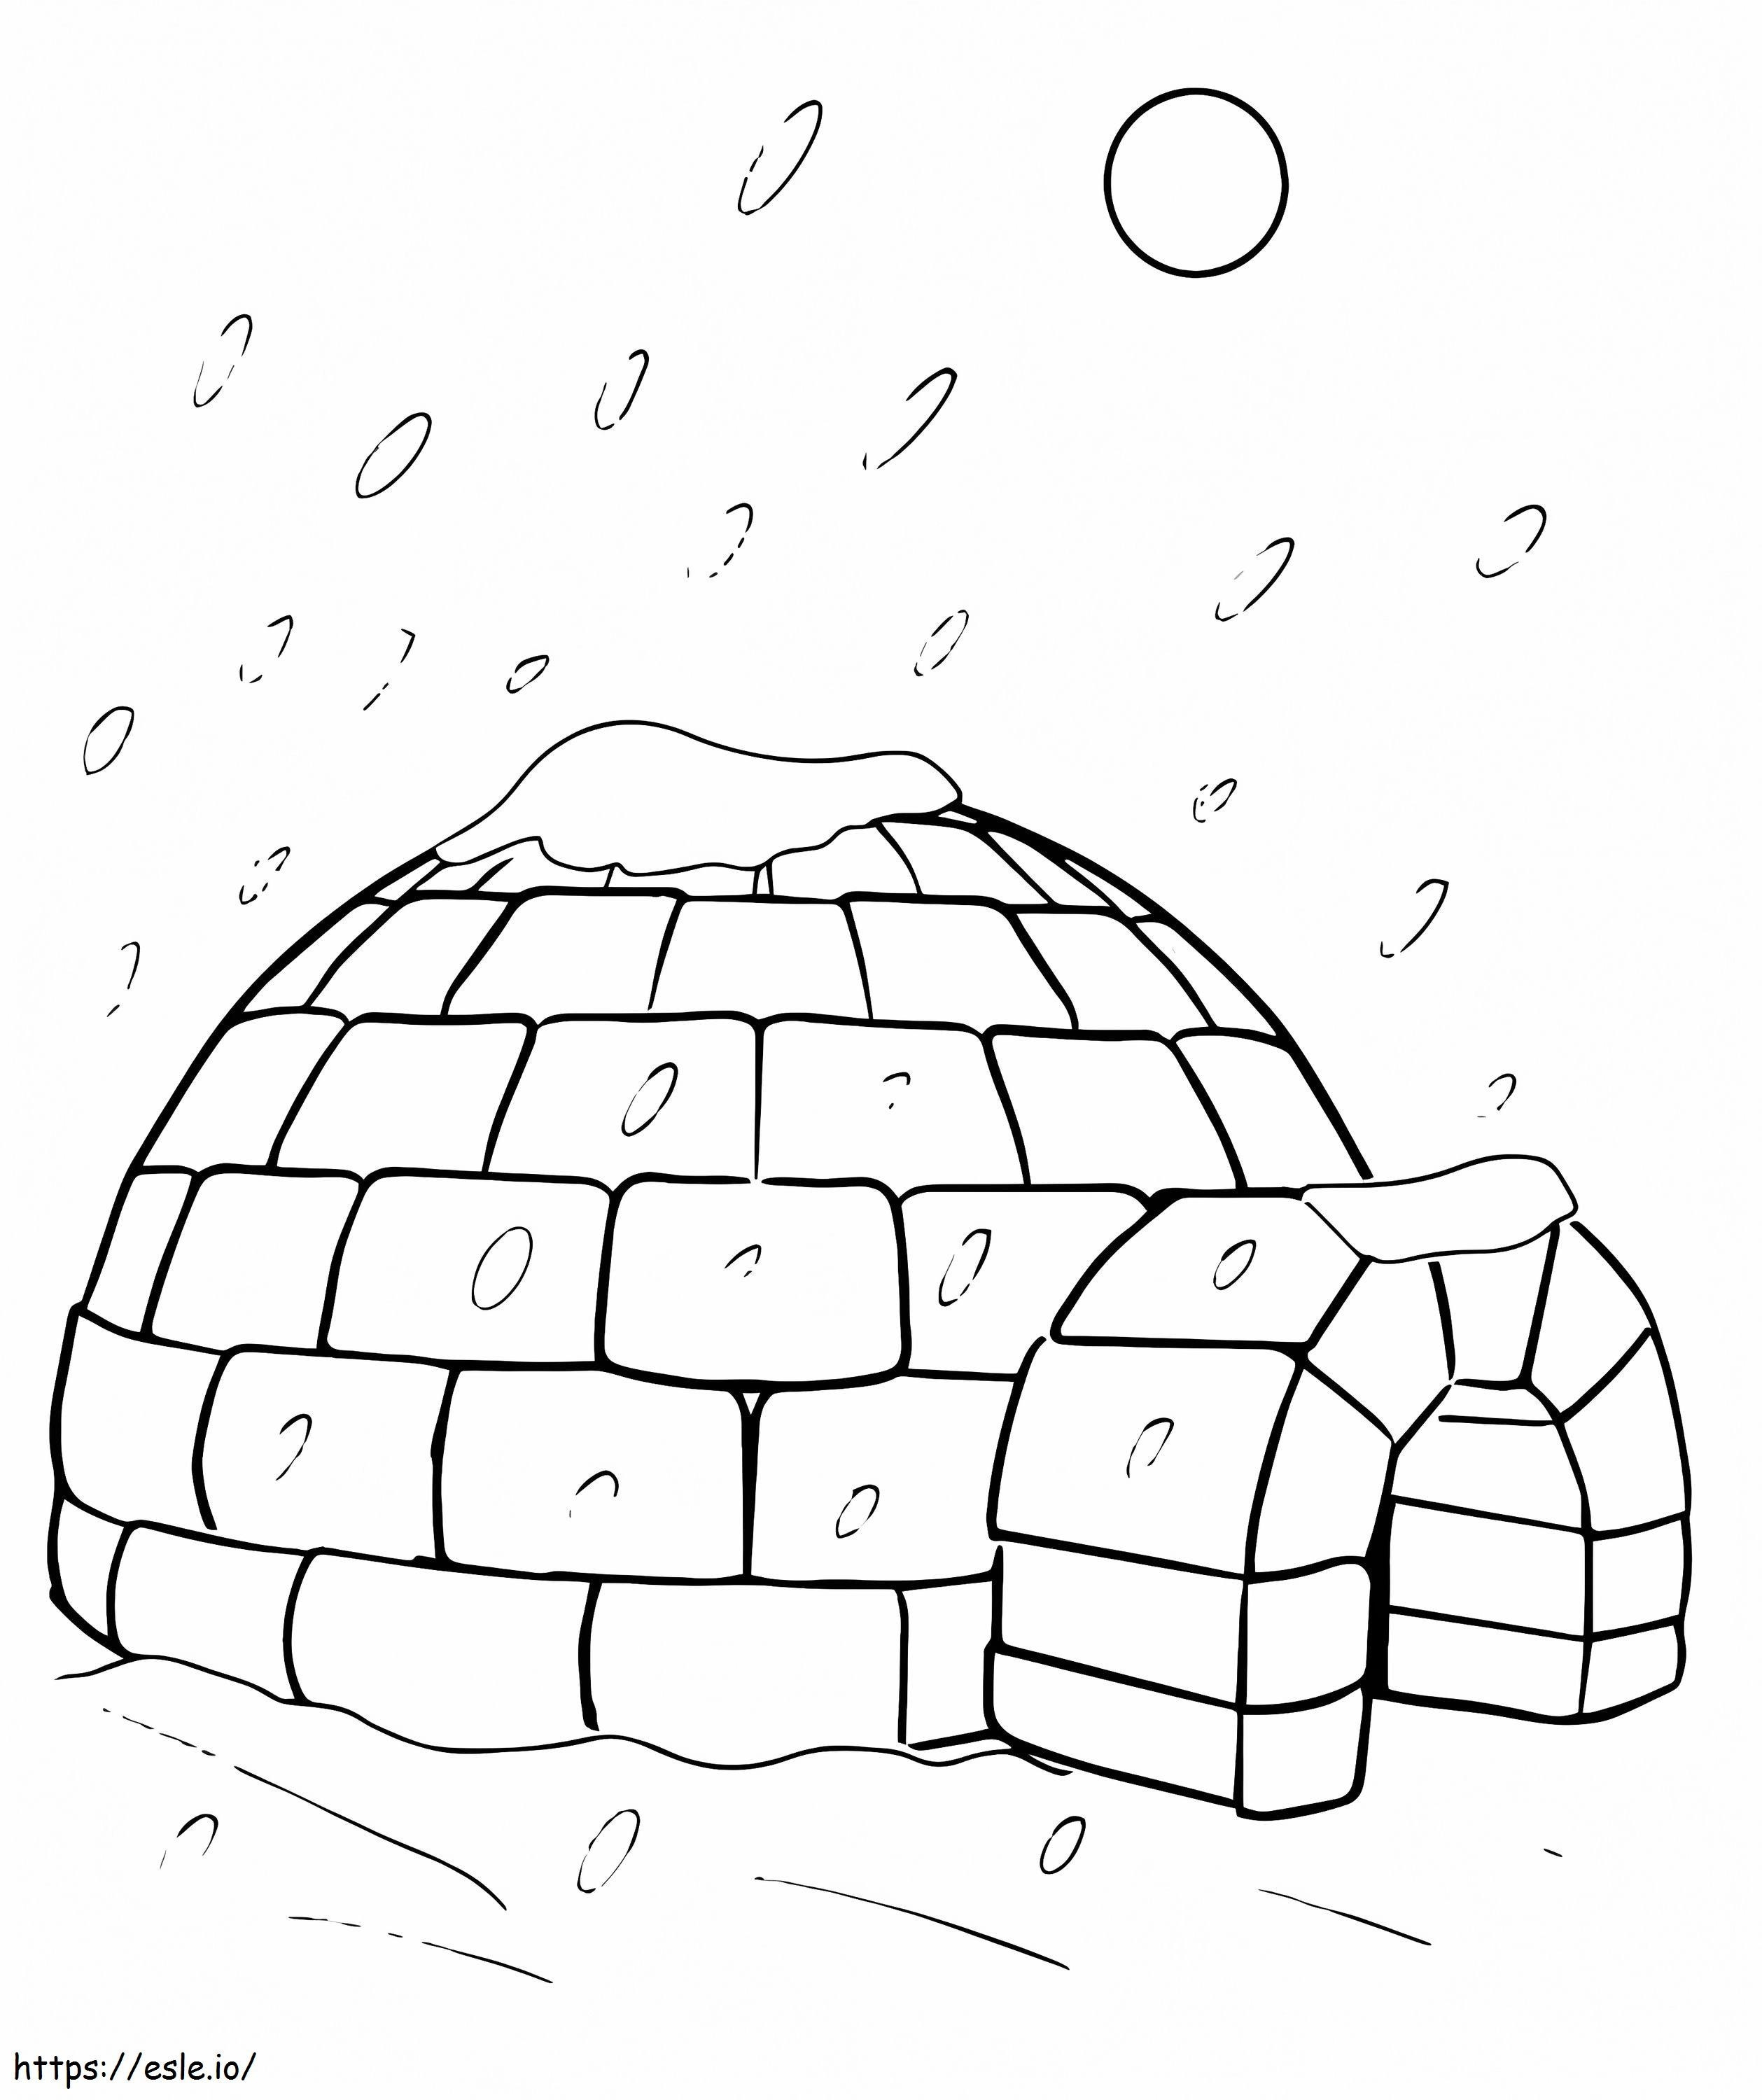 Igloo 1 coloring page